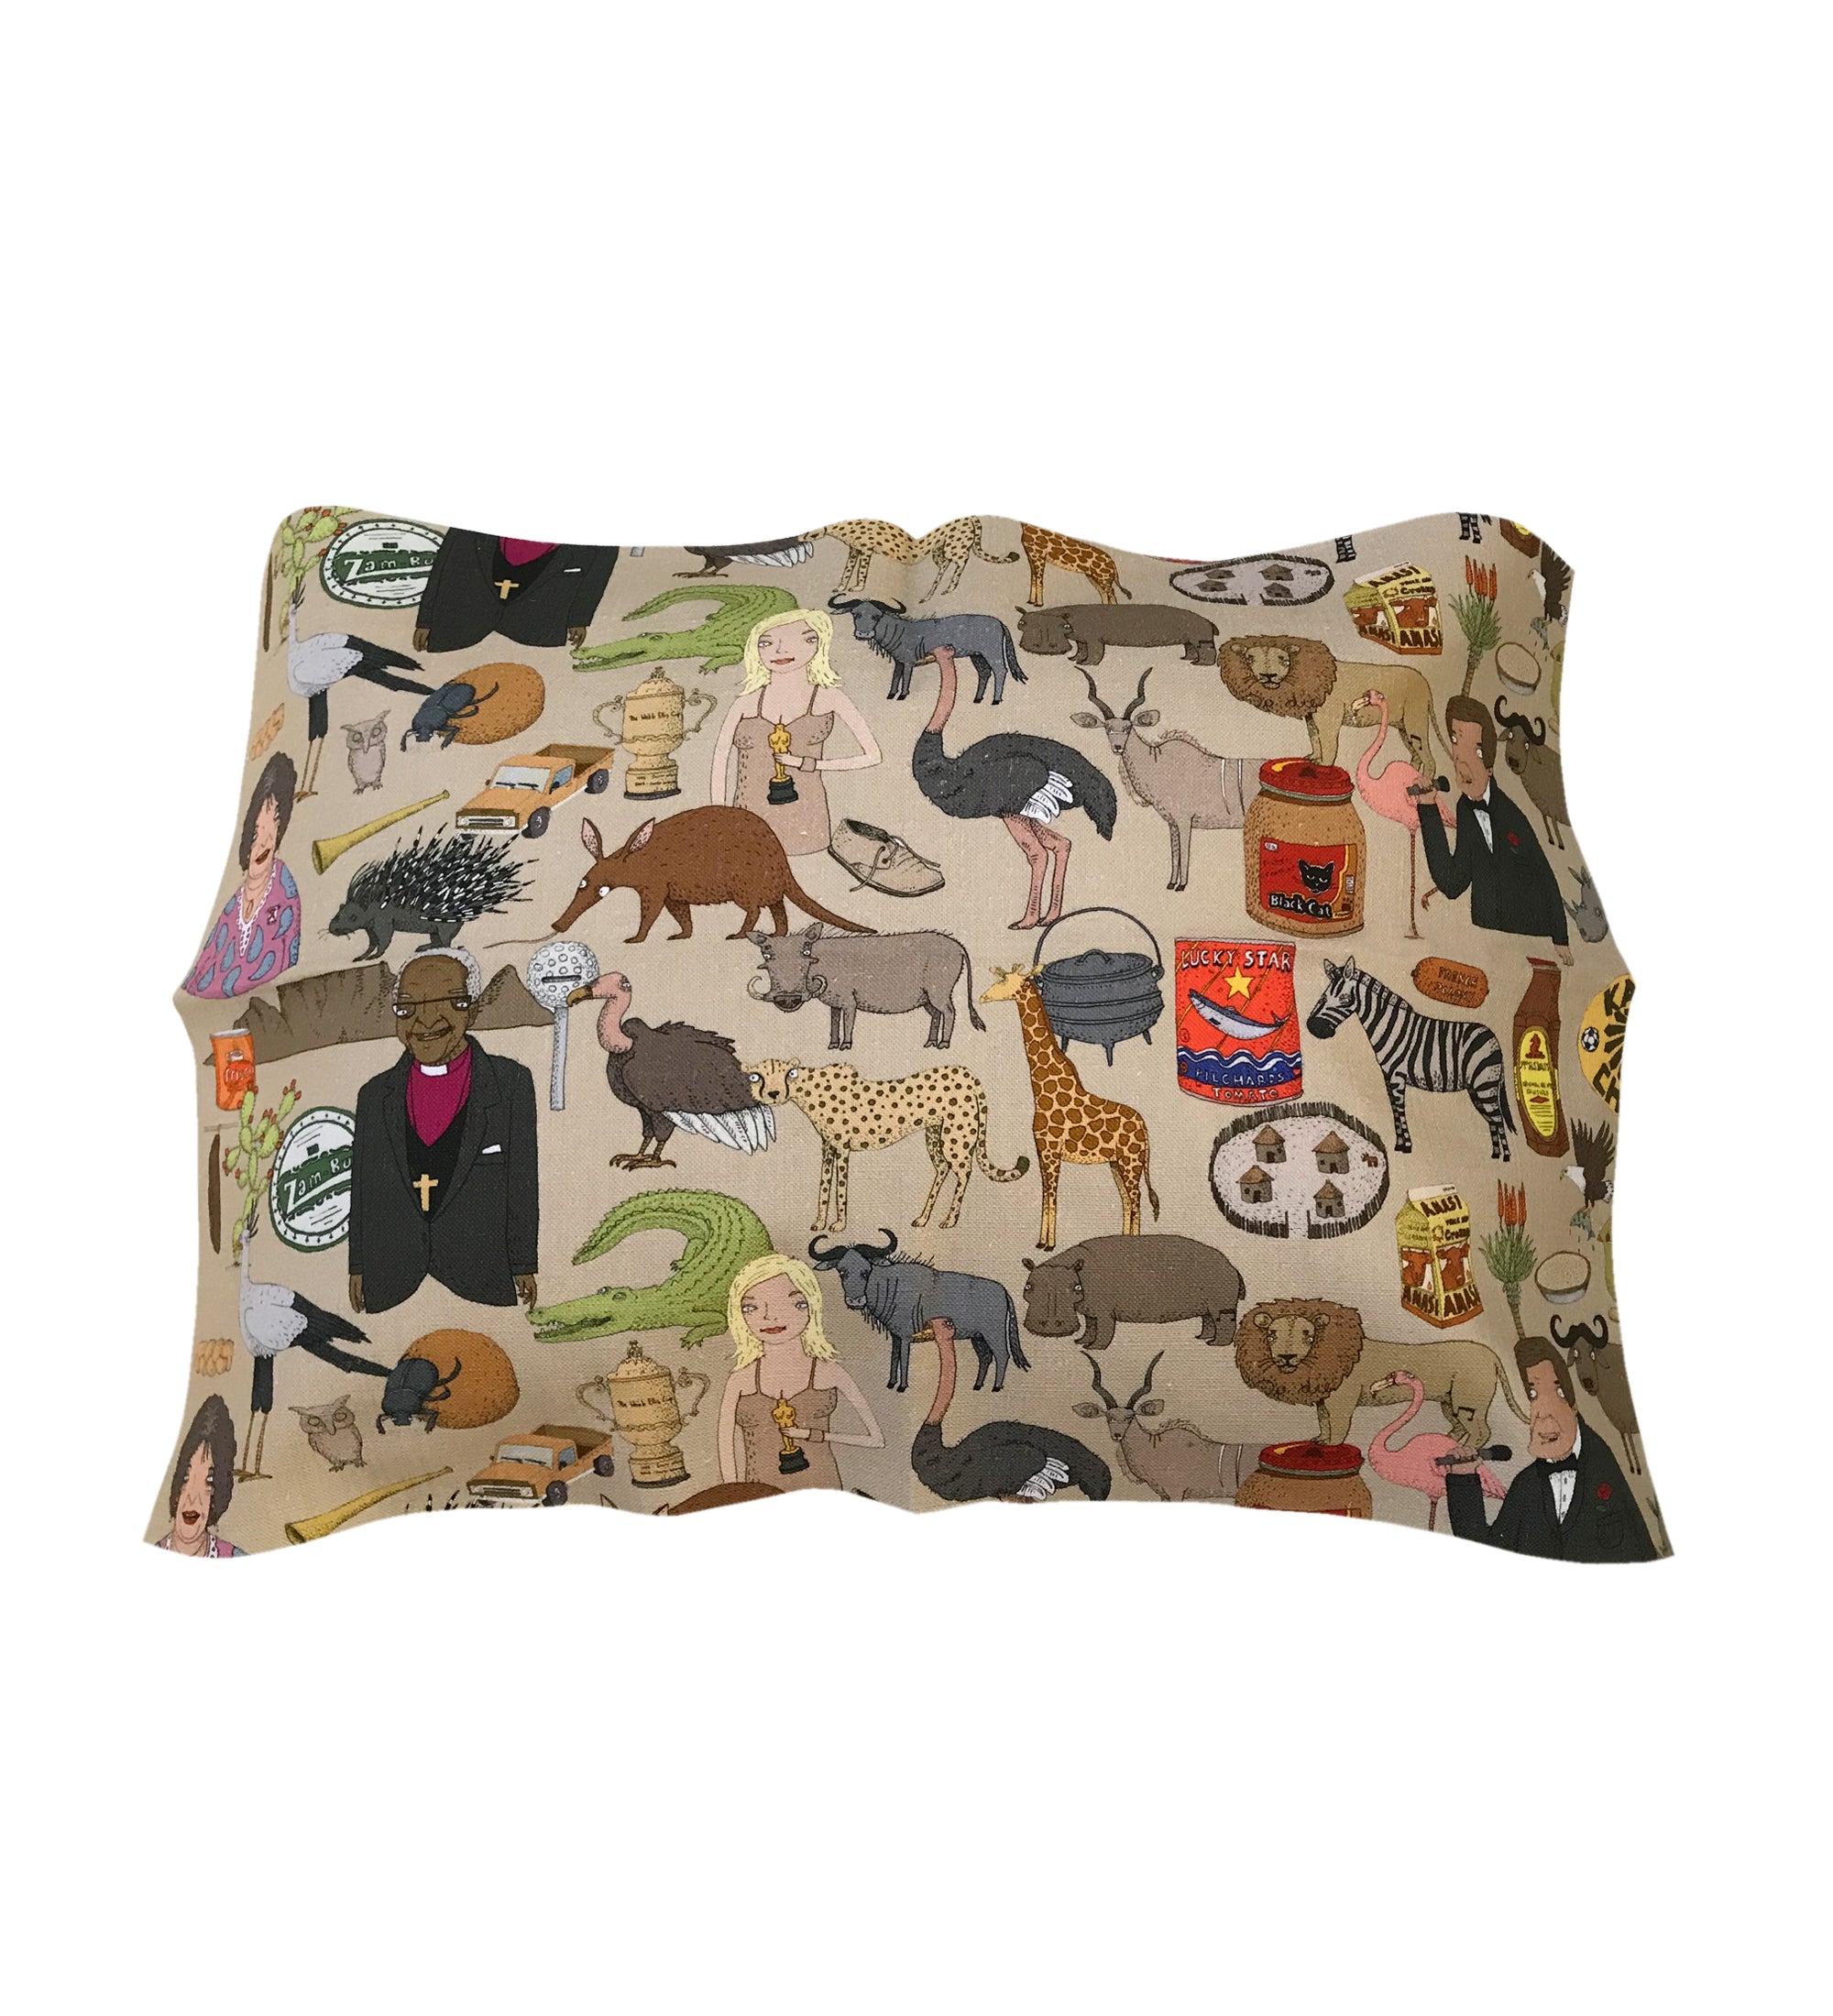 Iconic SA cushion cover 6x40. south african fabric. alex latimer. evita. lucky star. black cat peanut butter